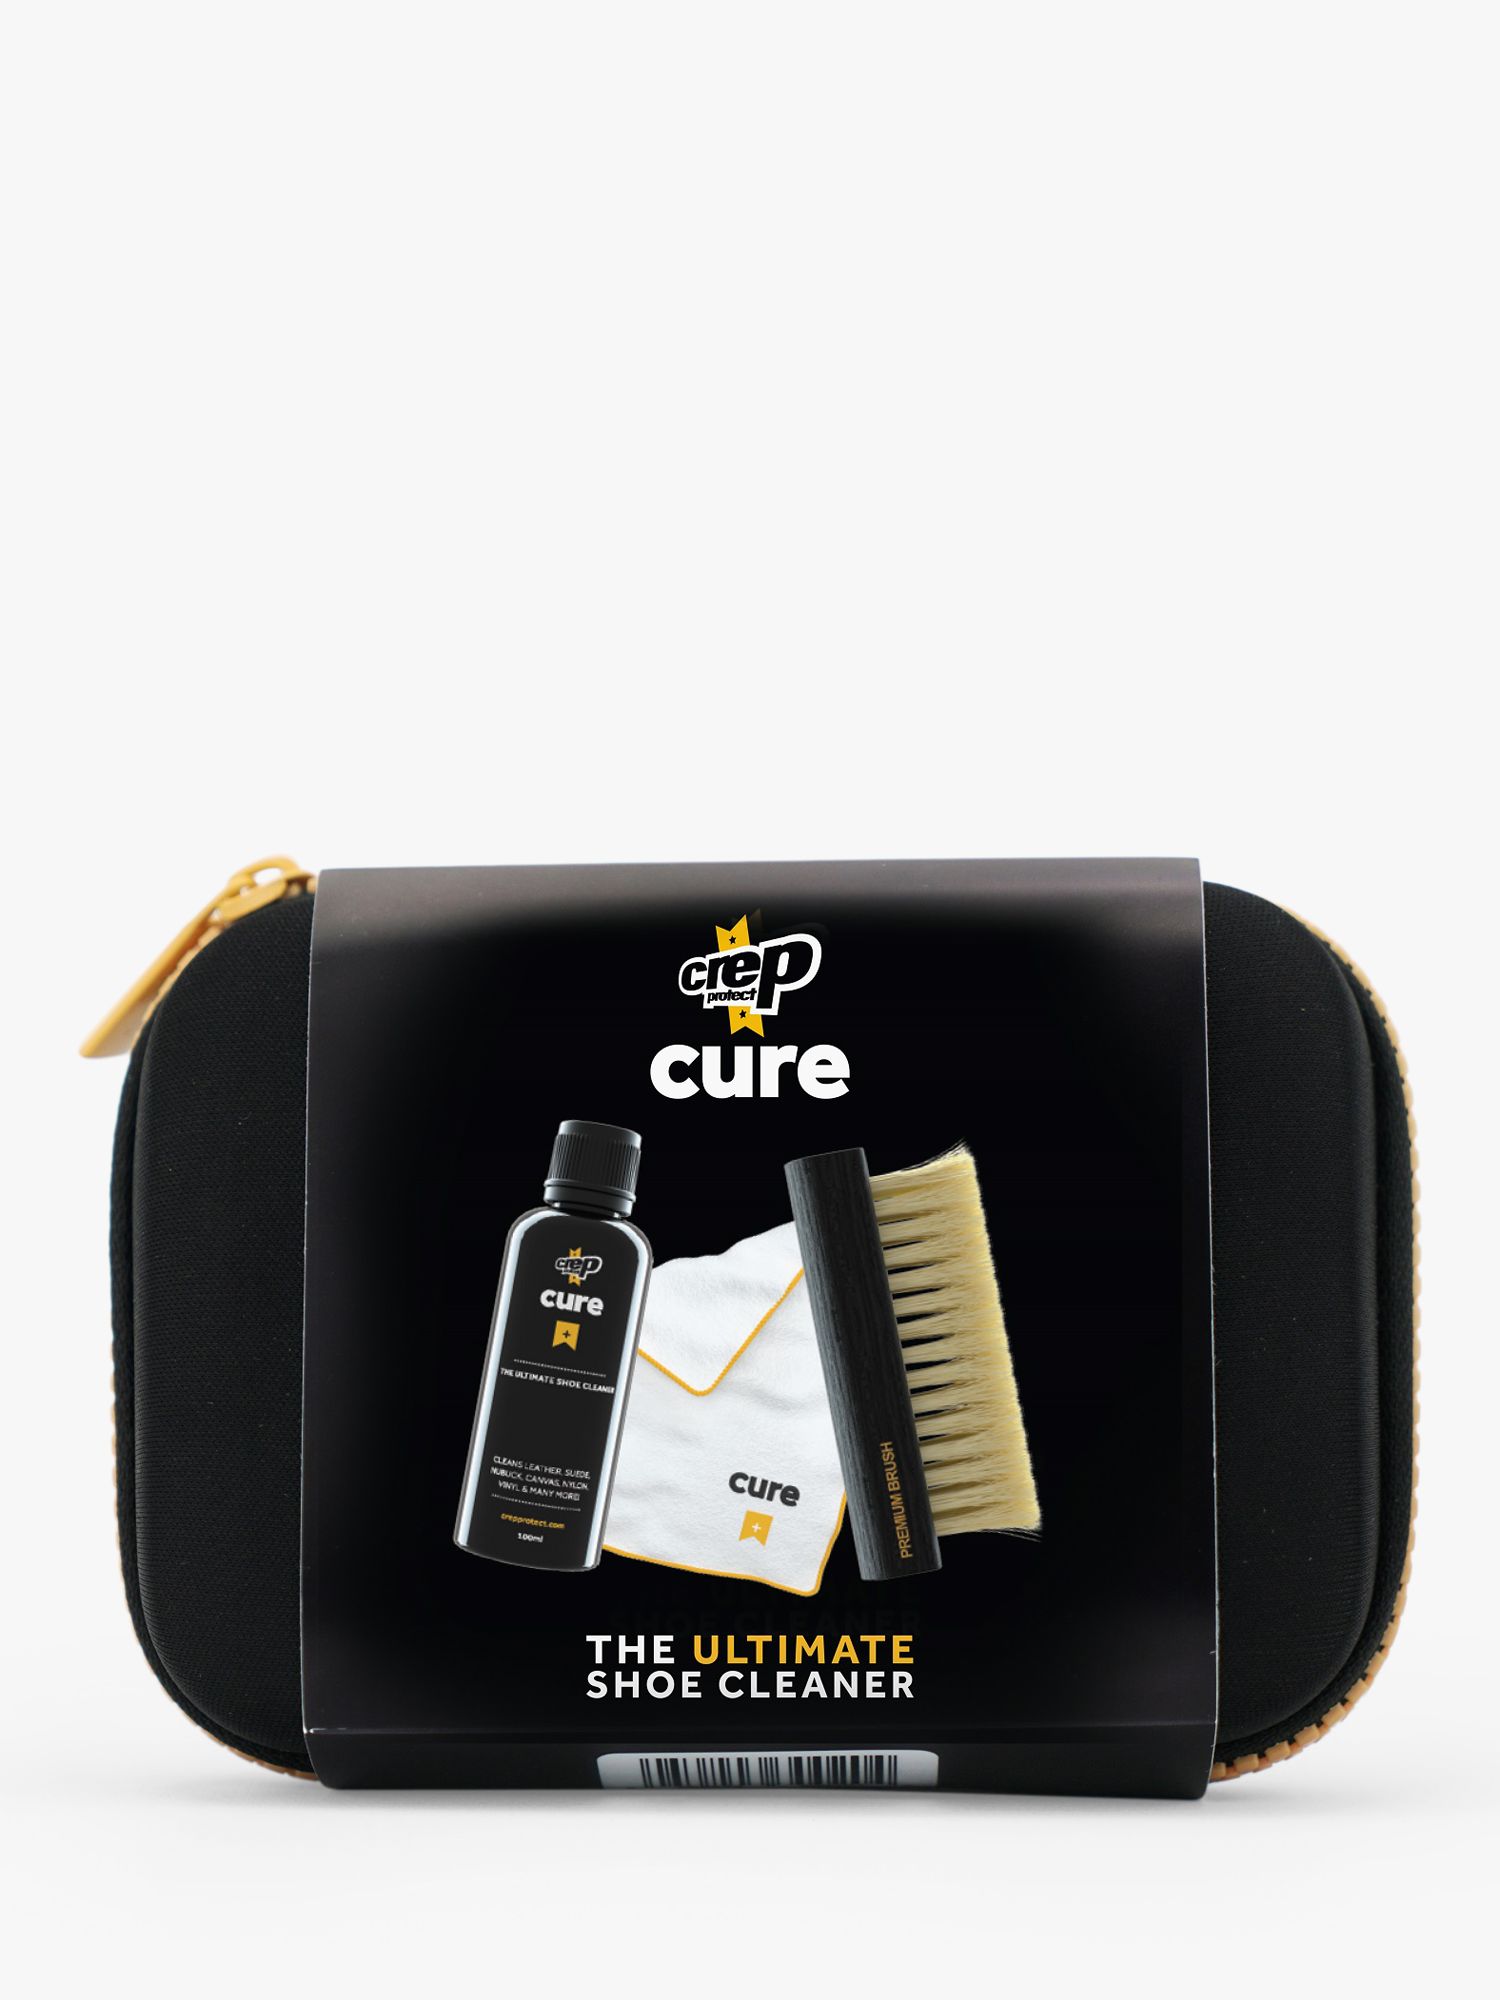  Crep Protect Shoe Cleaner Kit - Cure Premium Sneaker Cleaning  Travel Kit with 3.5oz Solution, Premium Brush, and Microfiber Cloth : CREP:  Clothing, Shoes & Jewelry